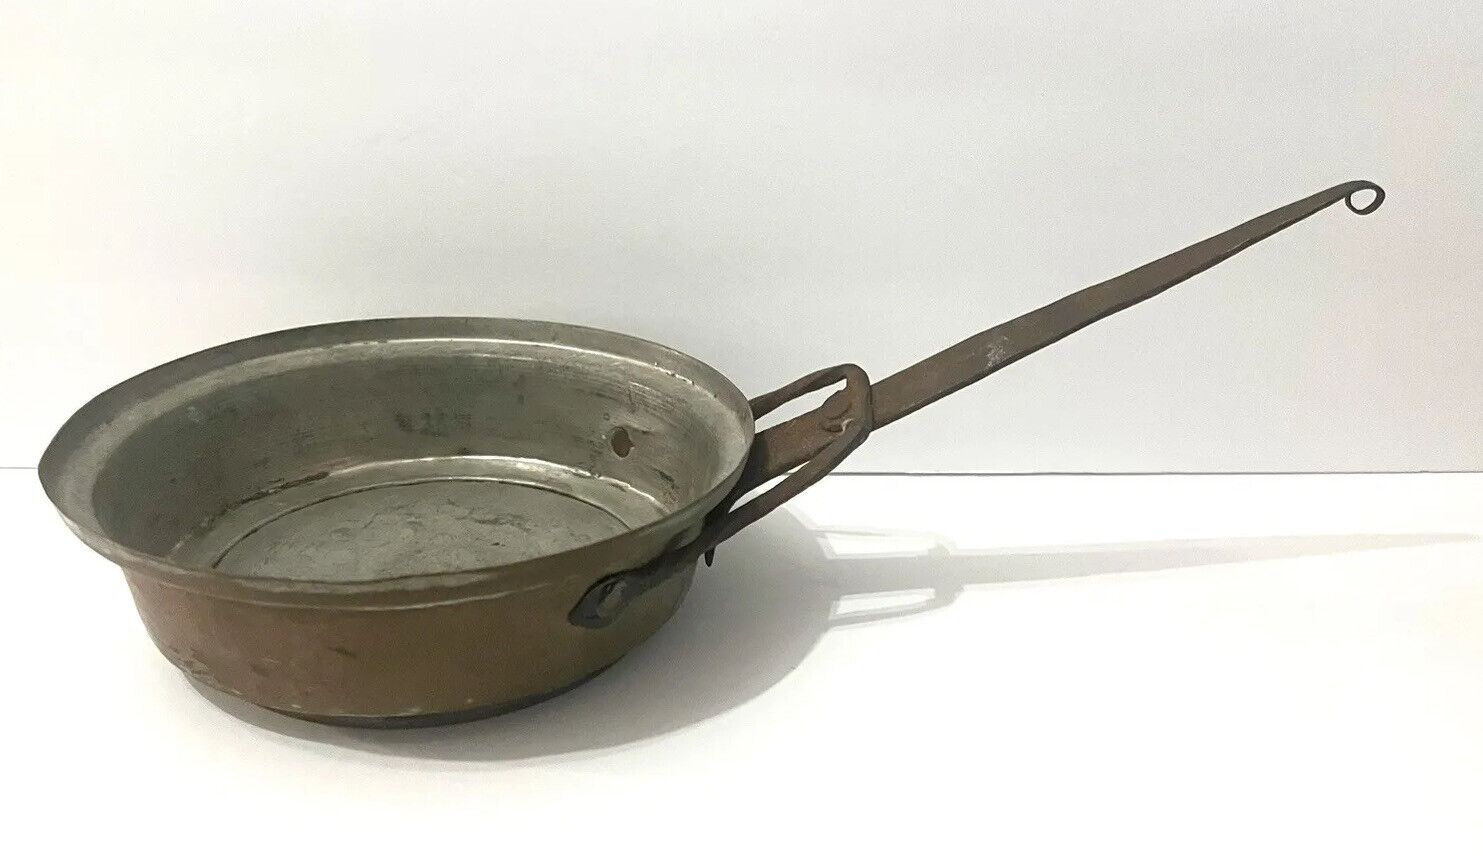 Copper Sauce/Cooking Pan Hand Forged Early Cookware-Antique